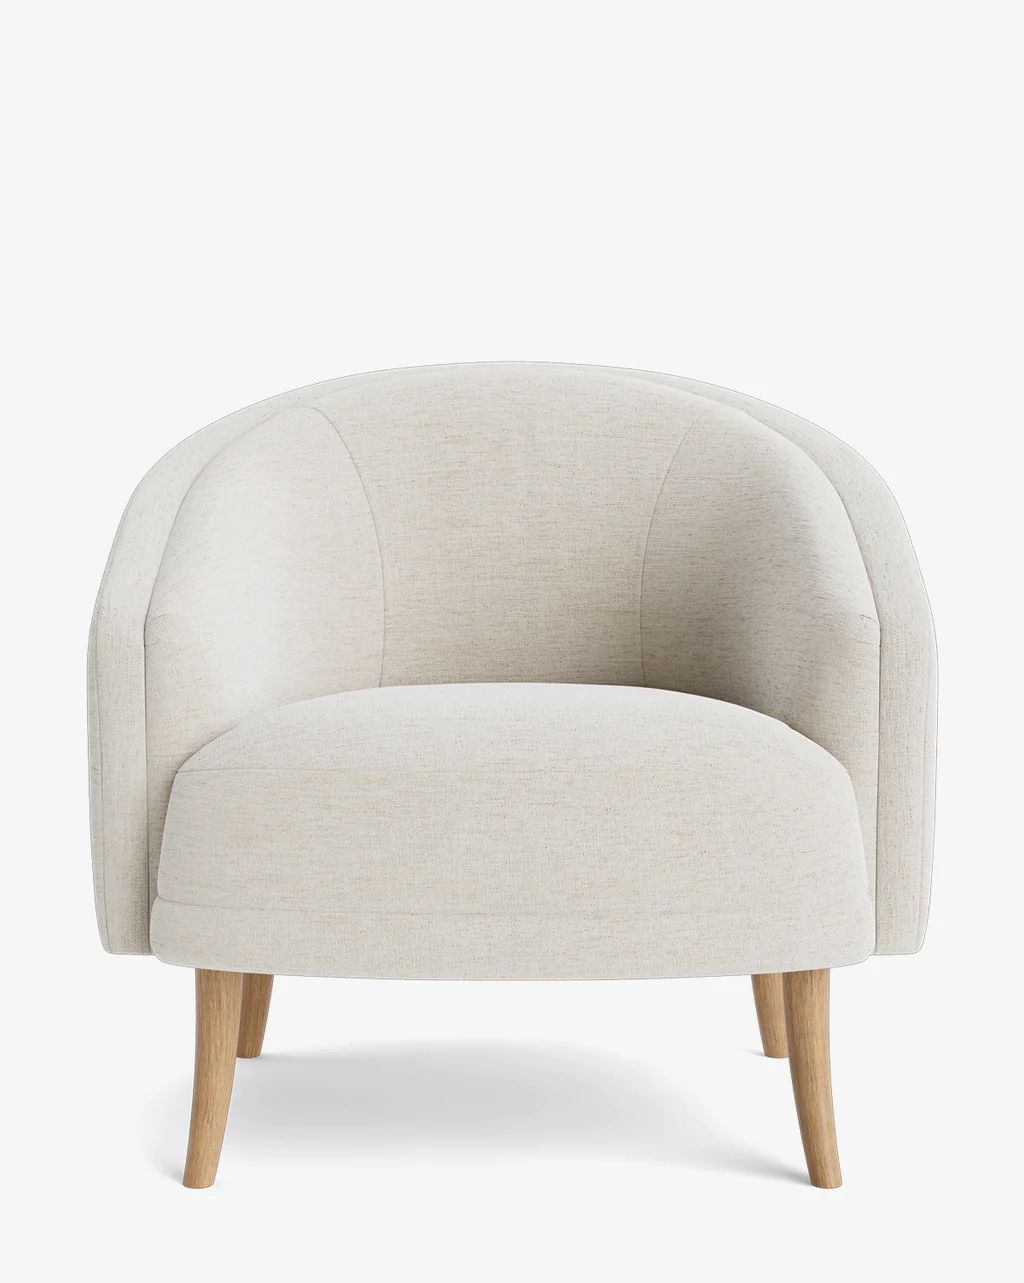 Marguerite Lounge Chair | McGee & Co.